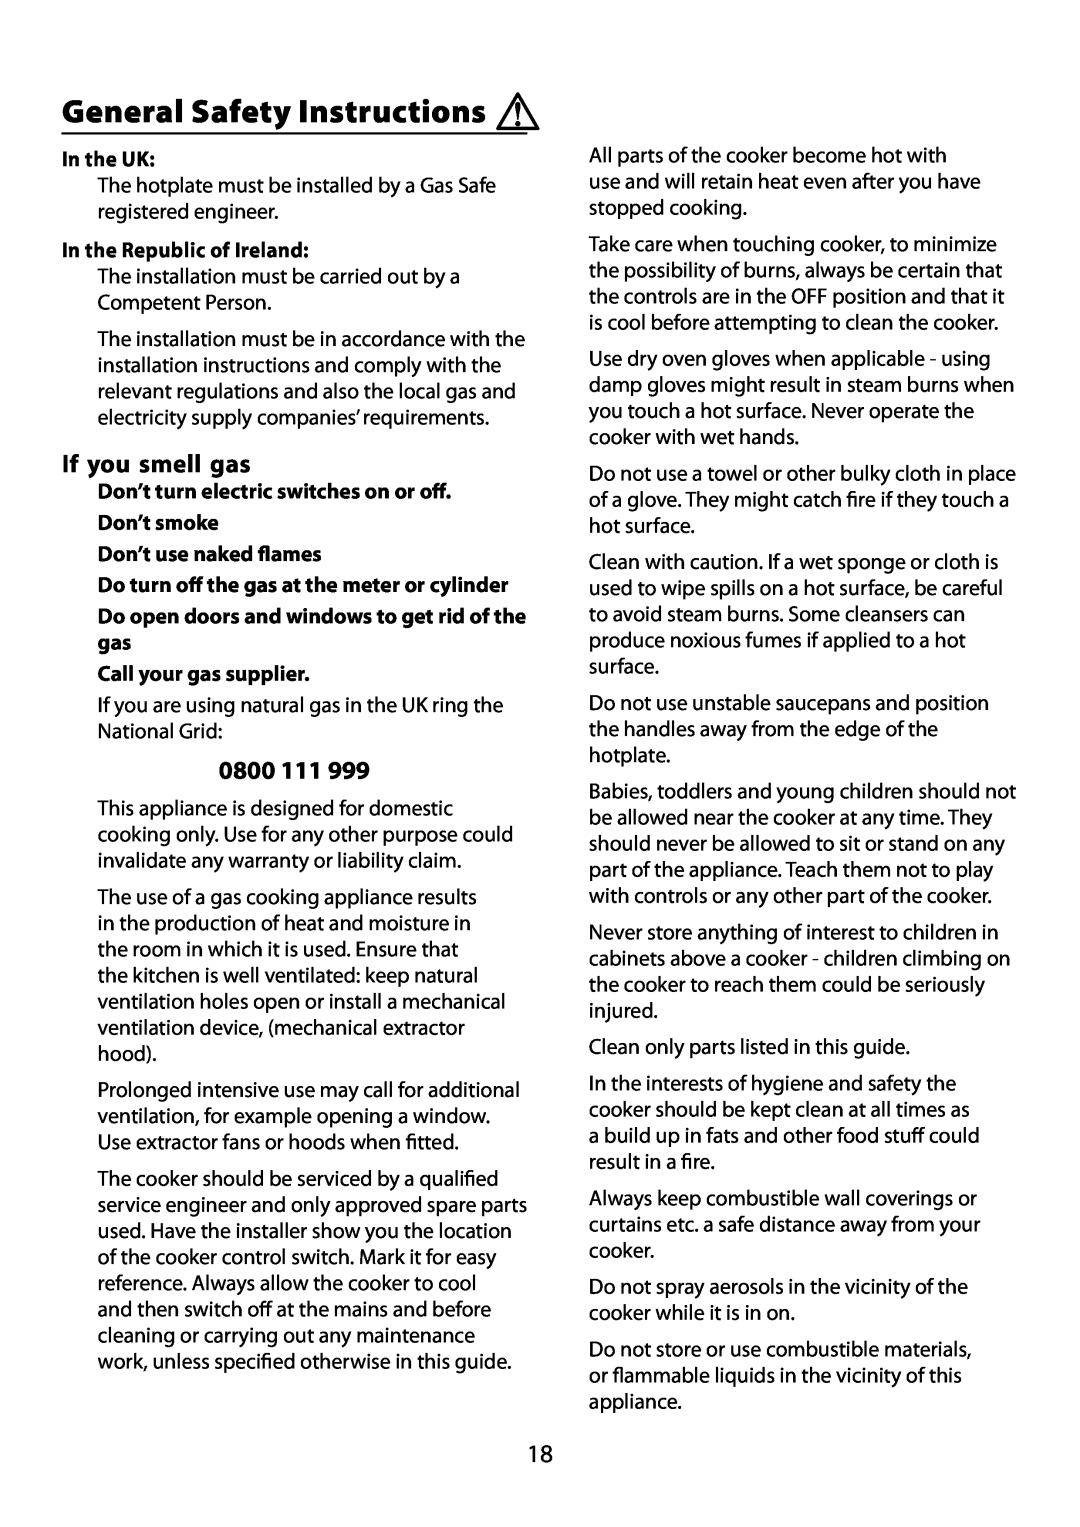 Garmin 210 GEO T DL user manual General Safety Instructions, If you smell gas, 0800, In the UK, In the Republic of Ireland 